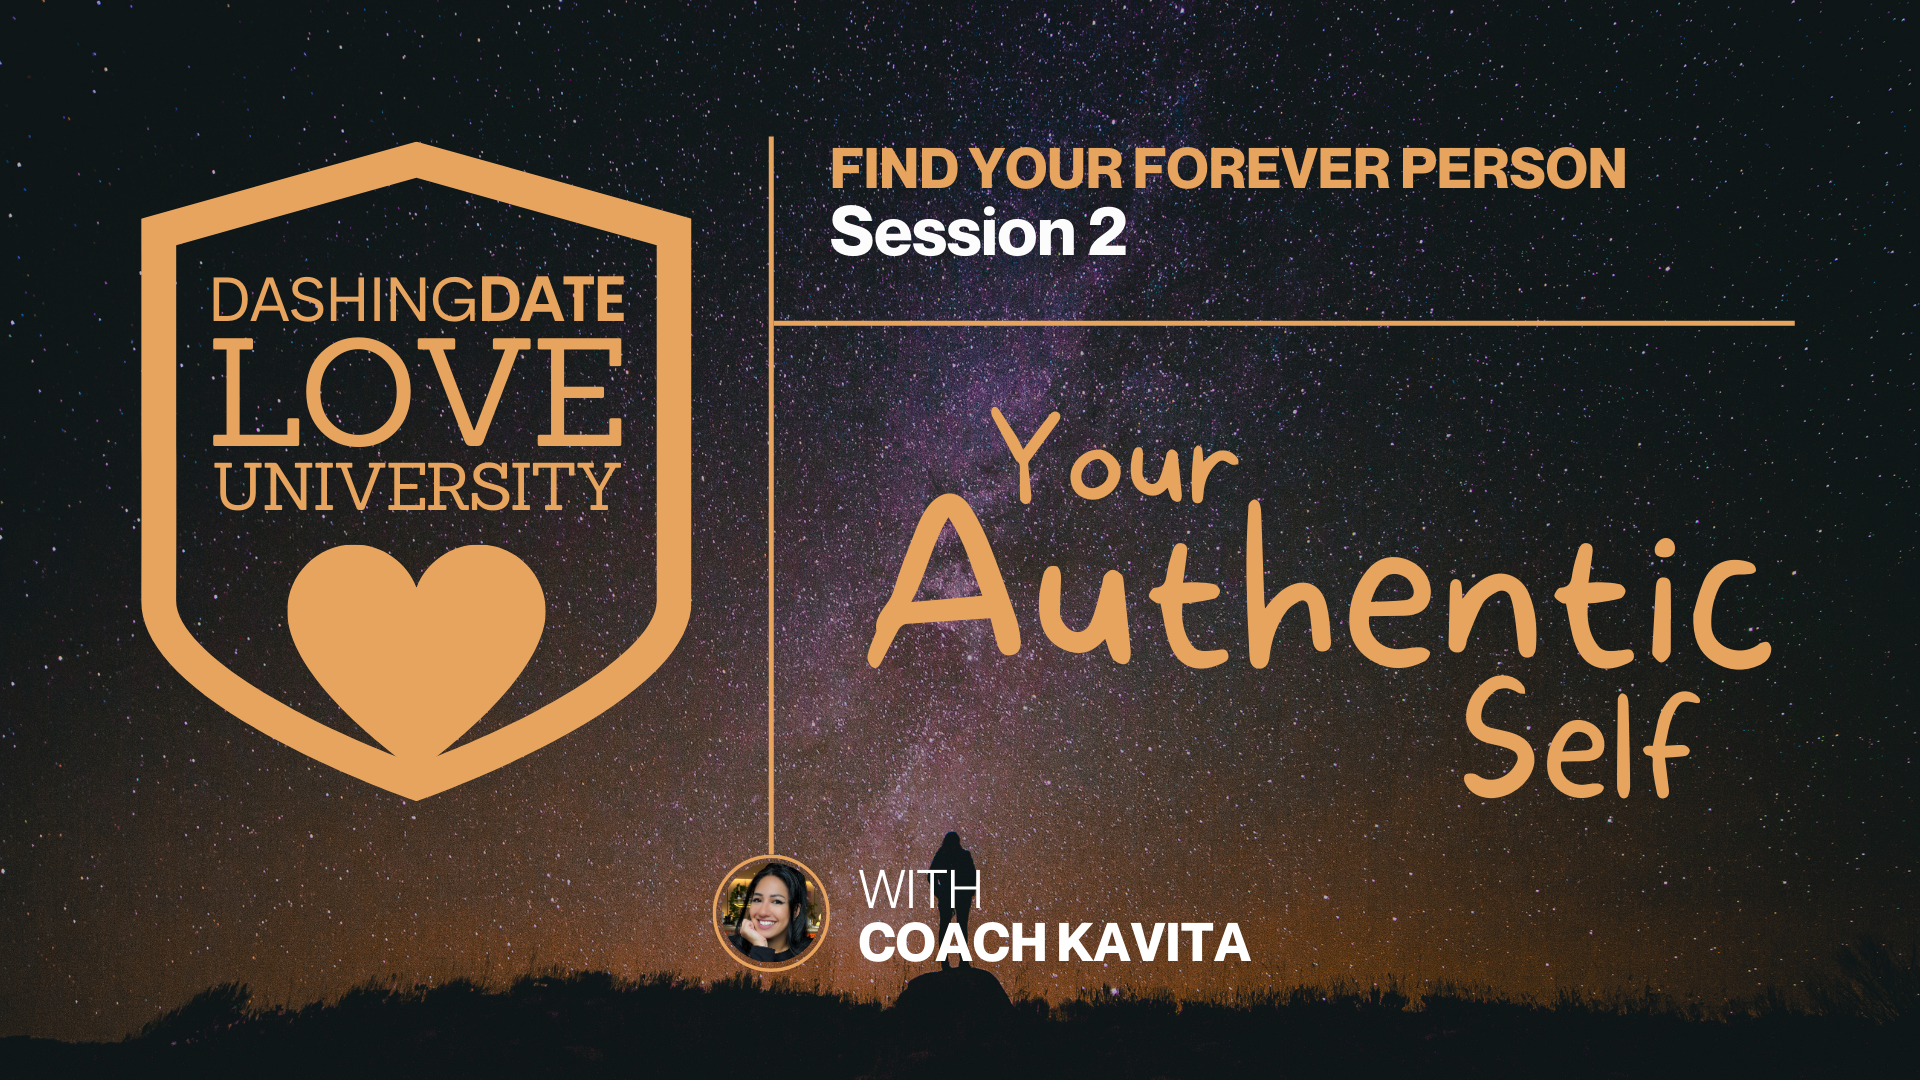 Session 2 Your Authentic Self